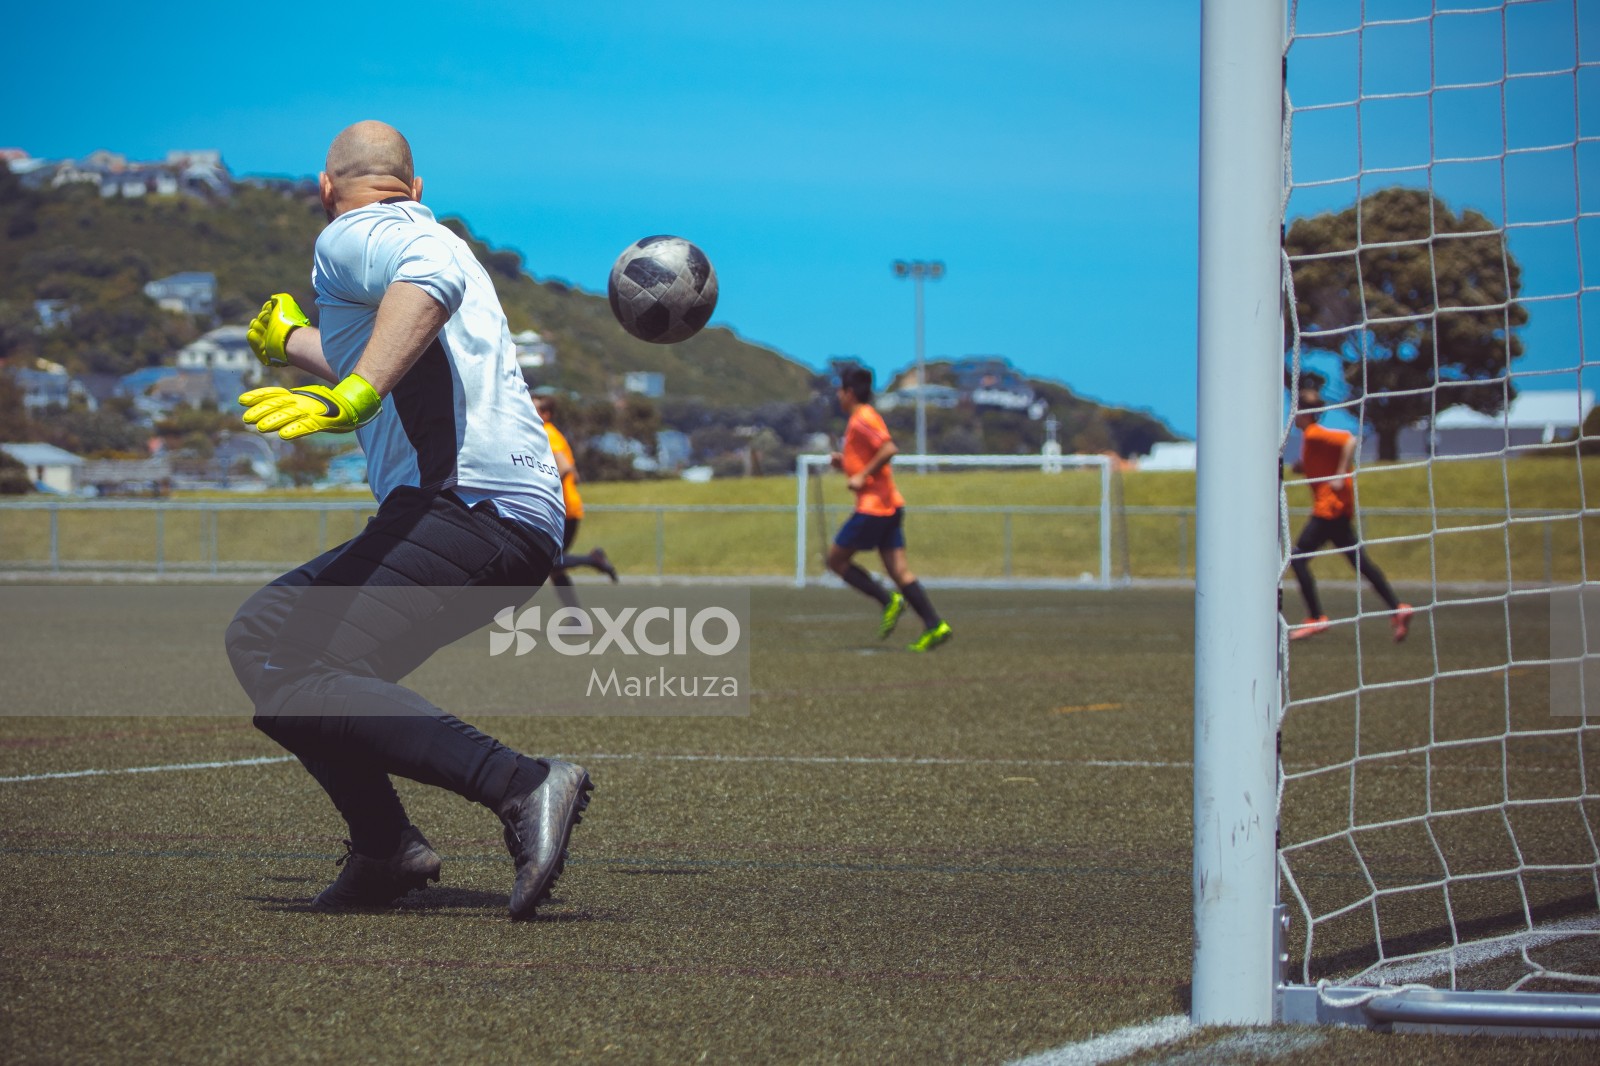 Goalkeeper wearing neon yellow Nike gloves and an incoming ball - Sports Zone sunday league